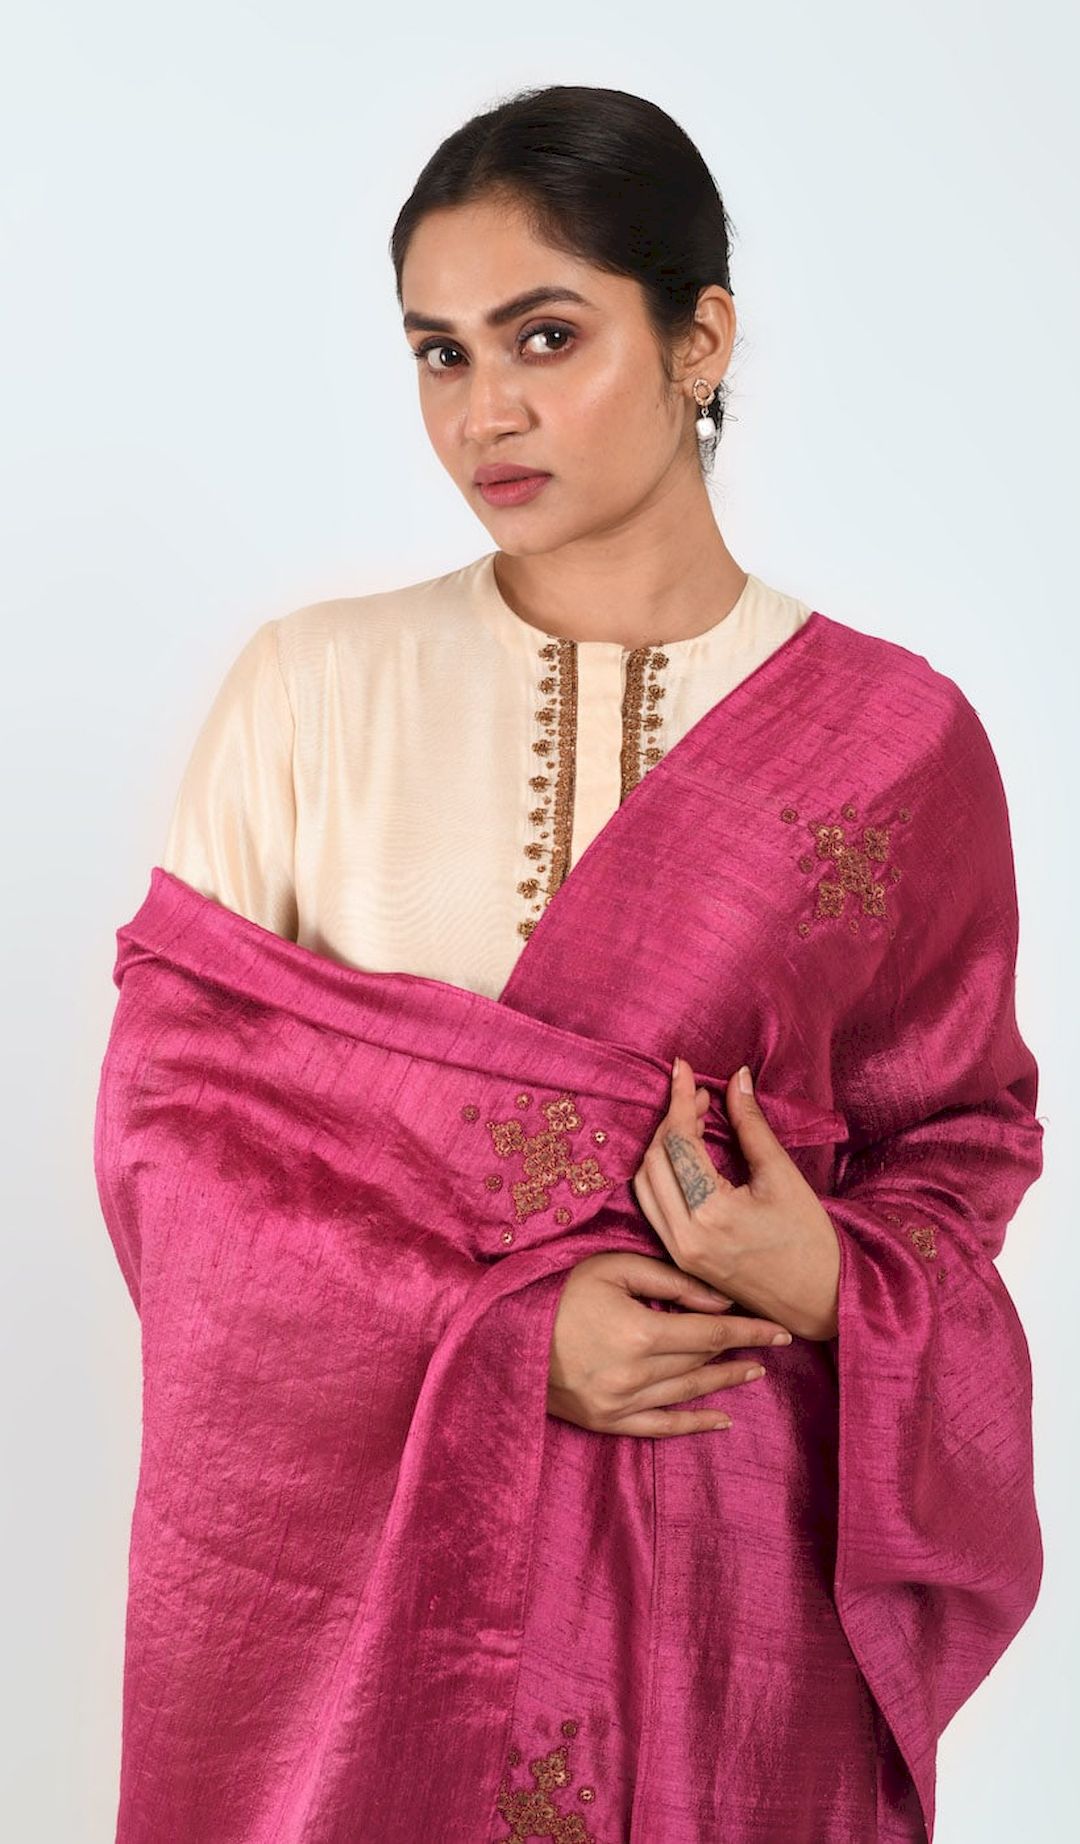 Pink Dupatta With Hand Embroidery Bootas - Prashant Chouhan